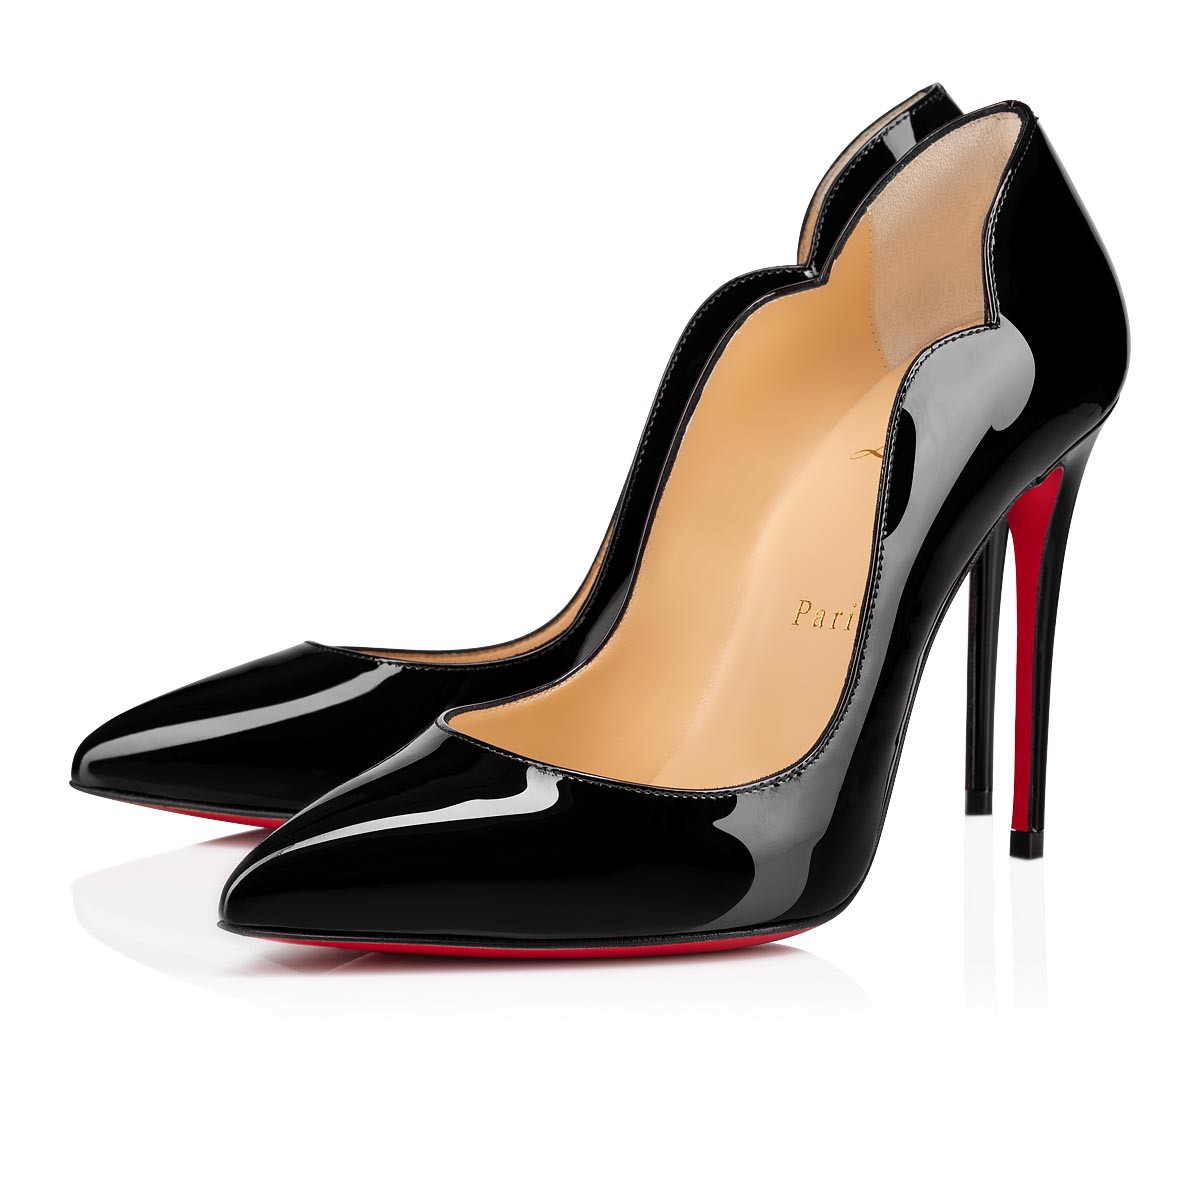 Detail Christian Louboutin Cinderella Shoes For Sale Nomer 37